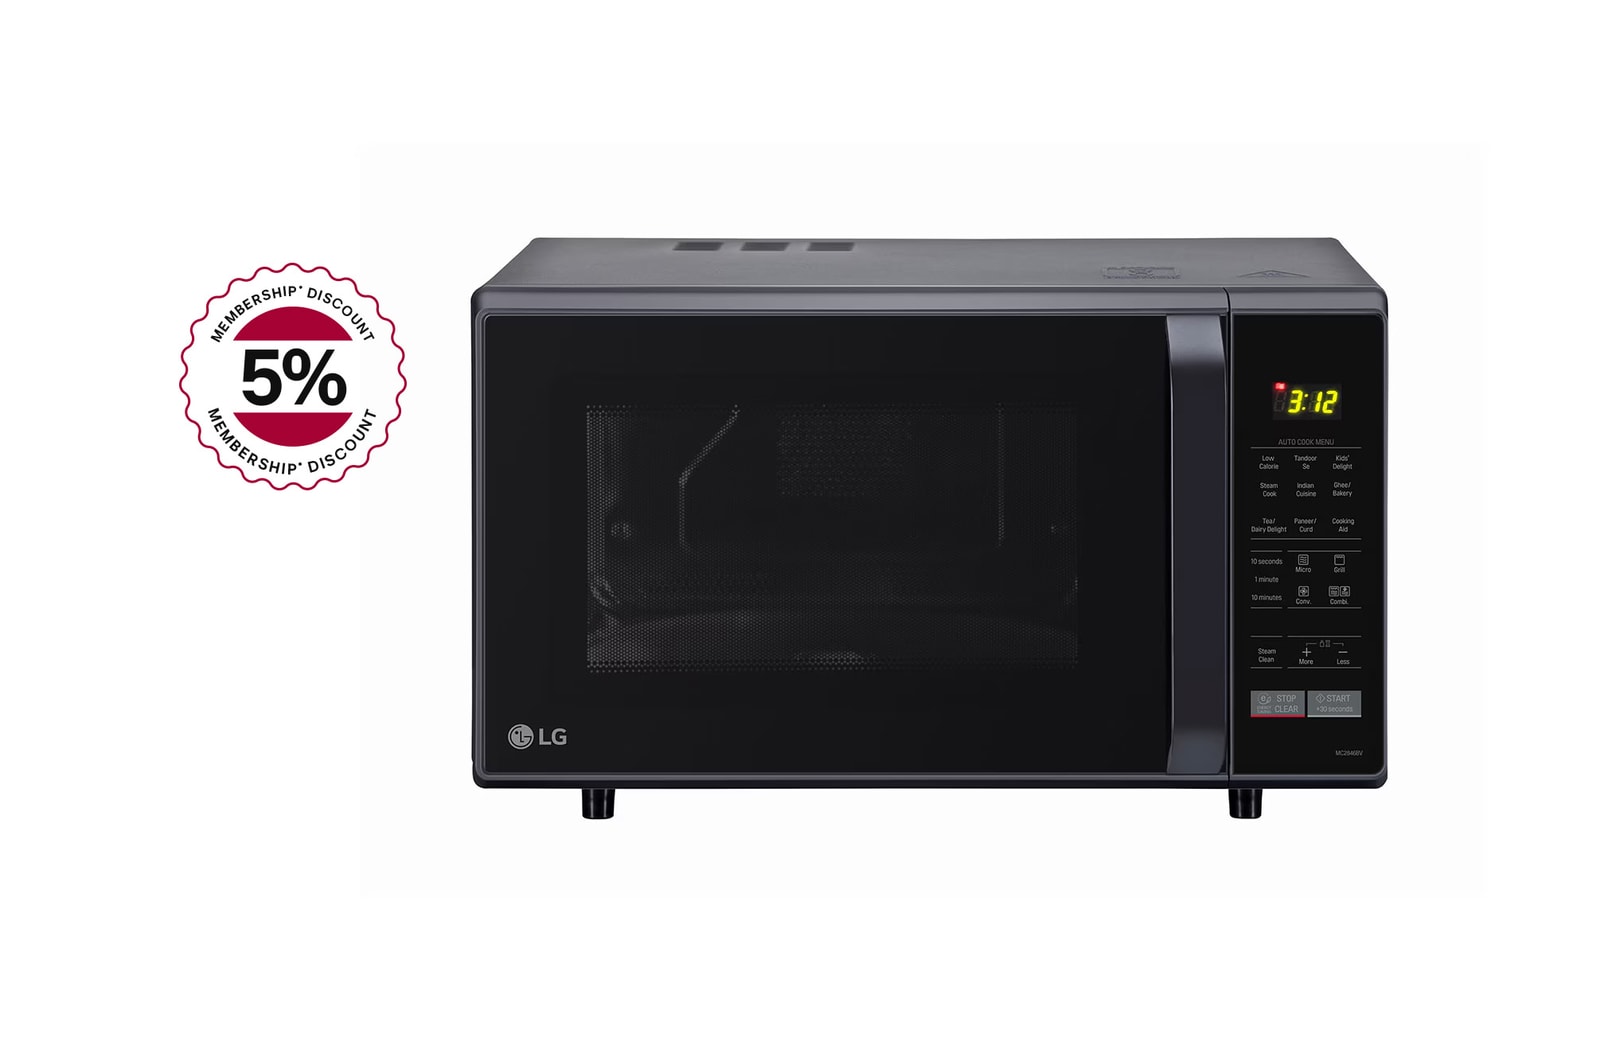 LG MC2846BV convection microwave front view